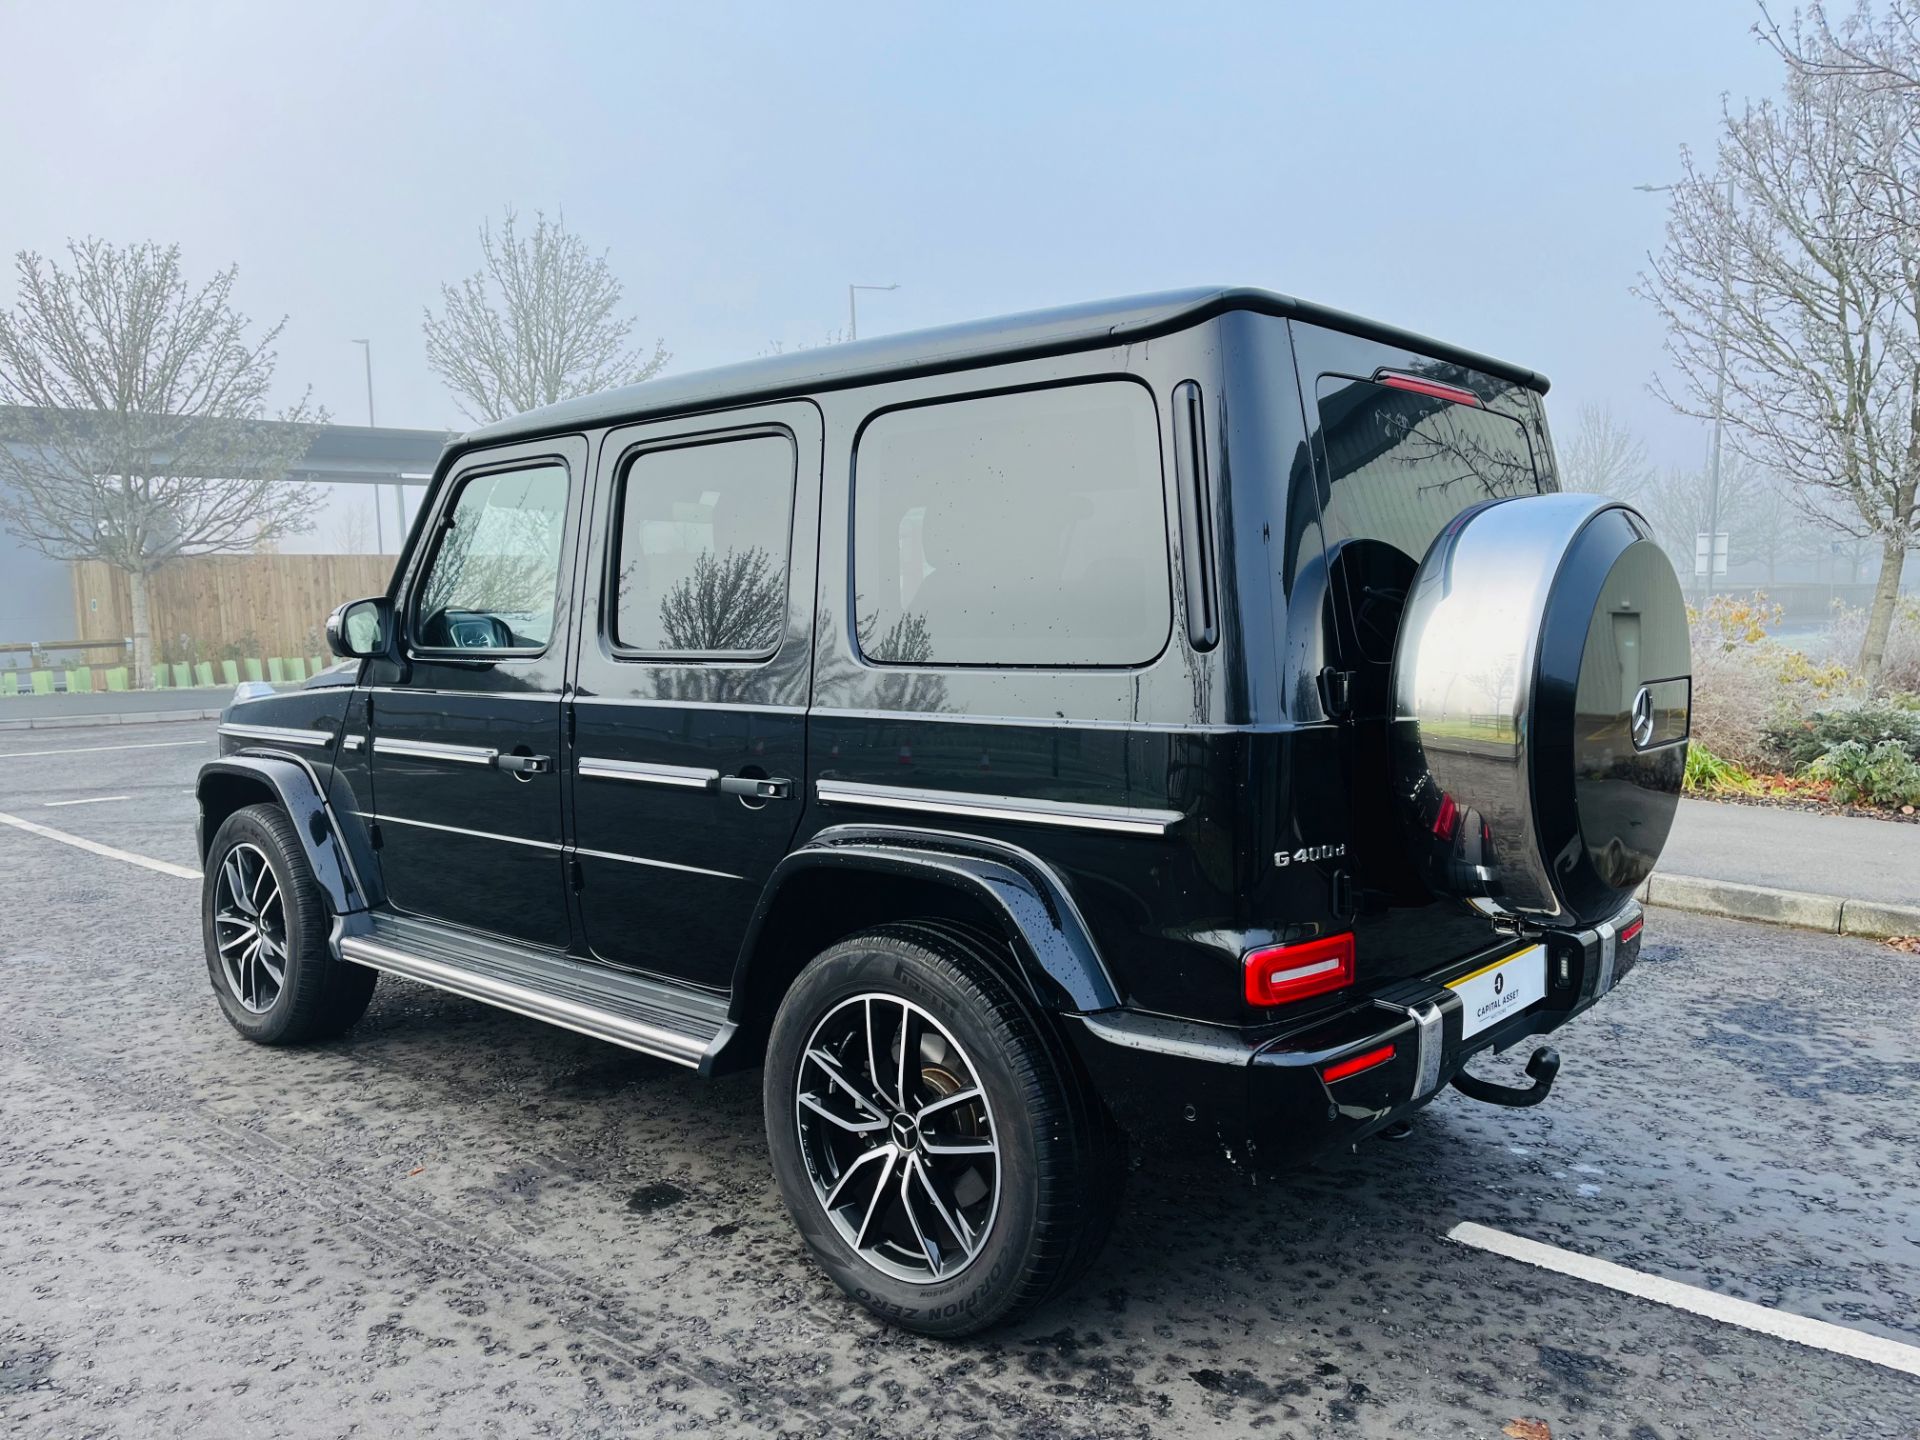 MERCEDES G400d AMG-LINE PREMIUM PLUS (72 REG) 1 OWNER WITH ONLY 9500 MILES - GREAT SPEC - Image 12 of 45